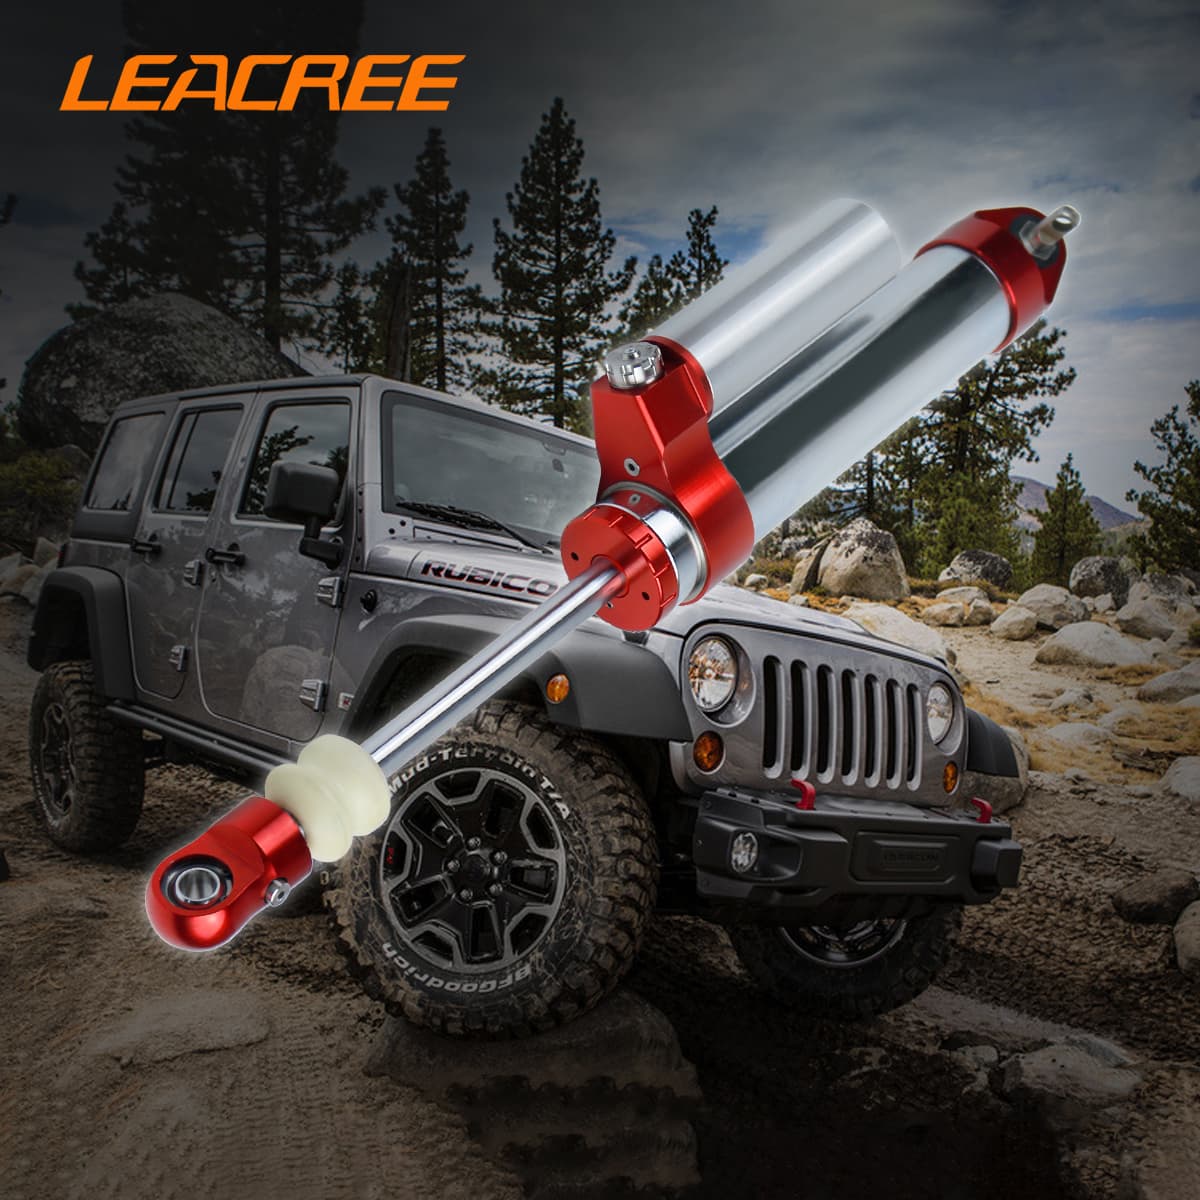 High performance Off-Road Shocks Spring Kit for Jeep 4x4 SUVs